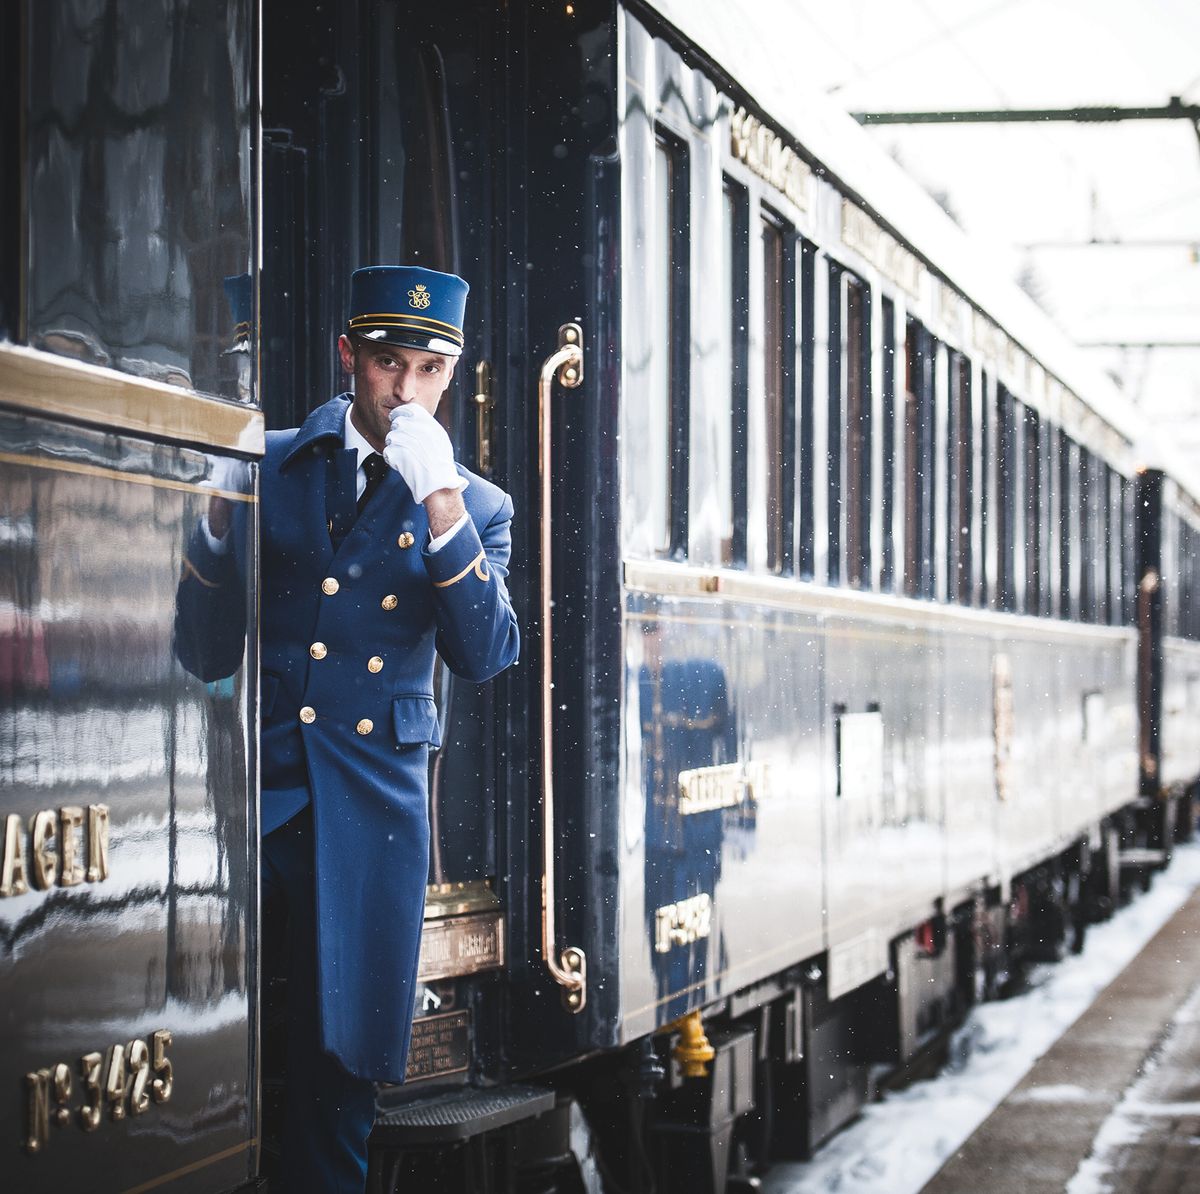 Photos of First-Class Cars on Trains Around the World